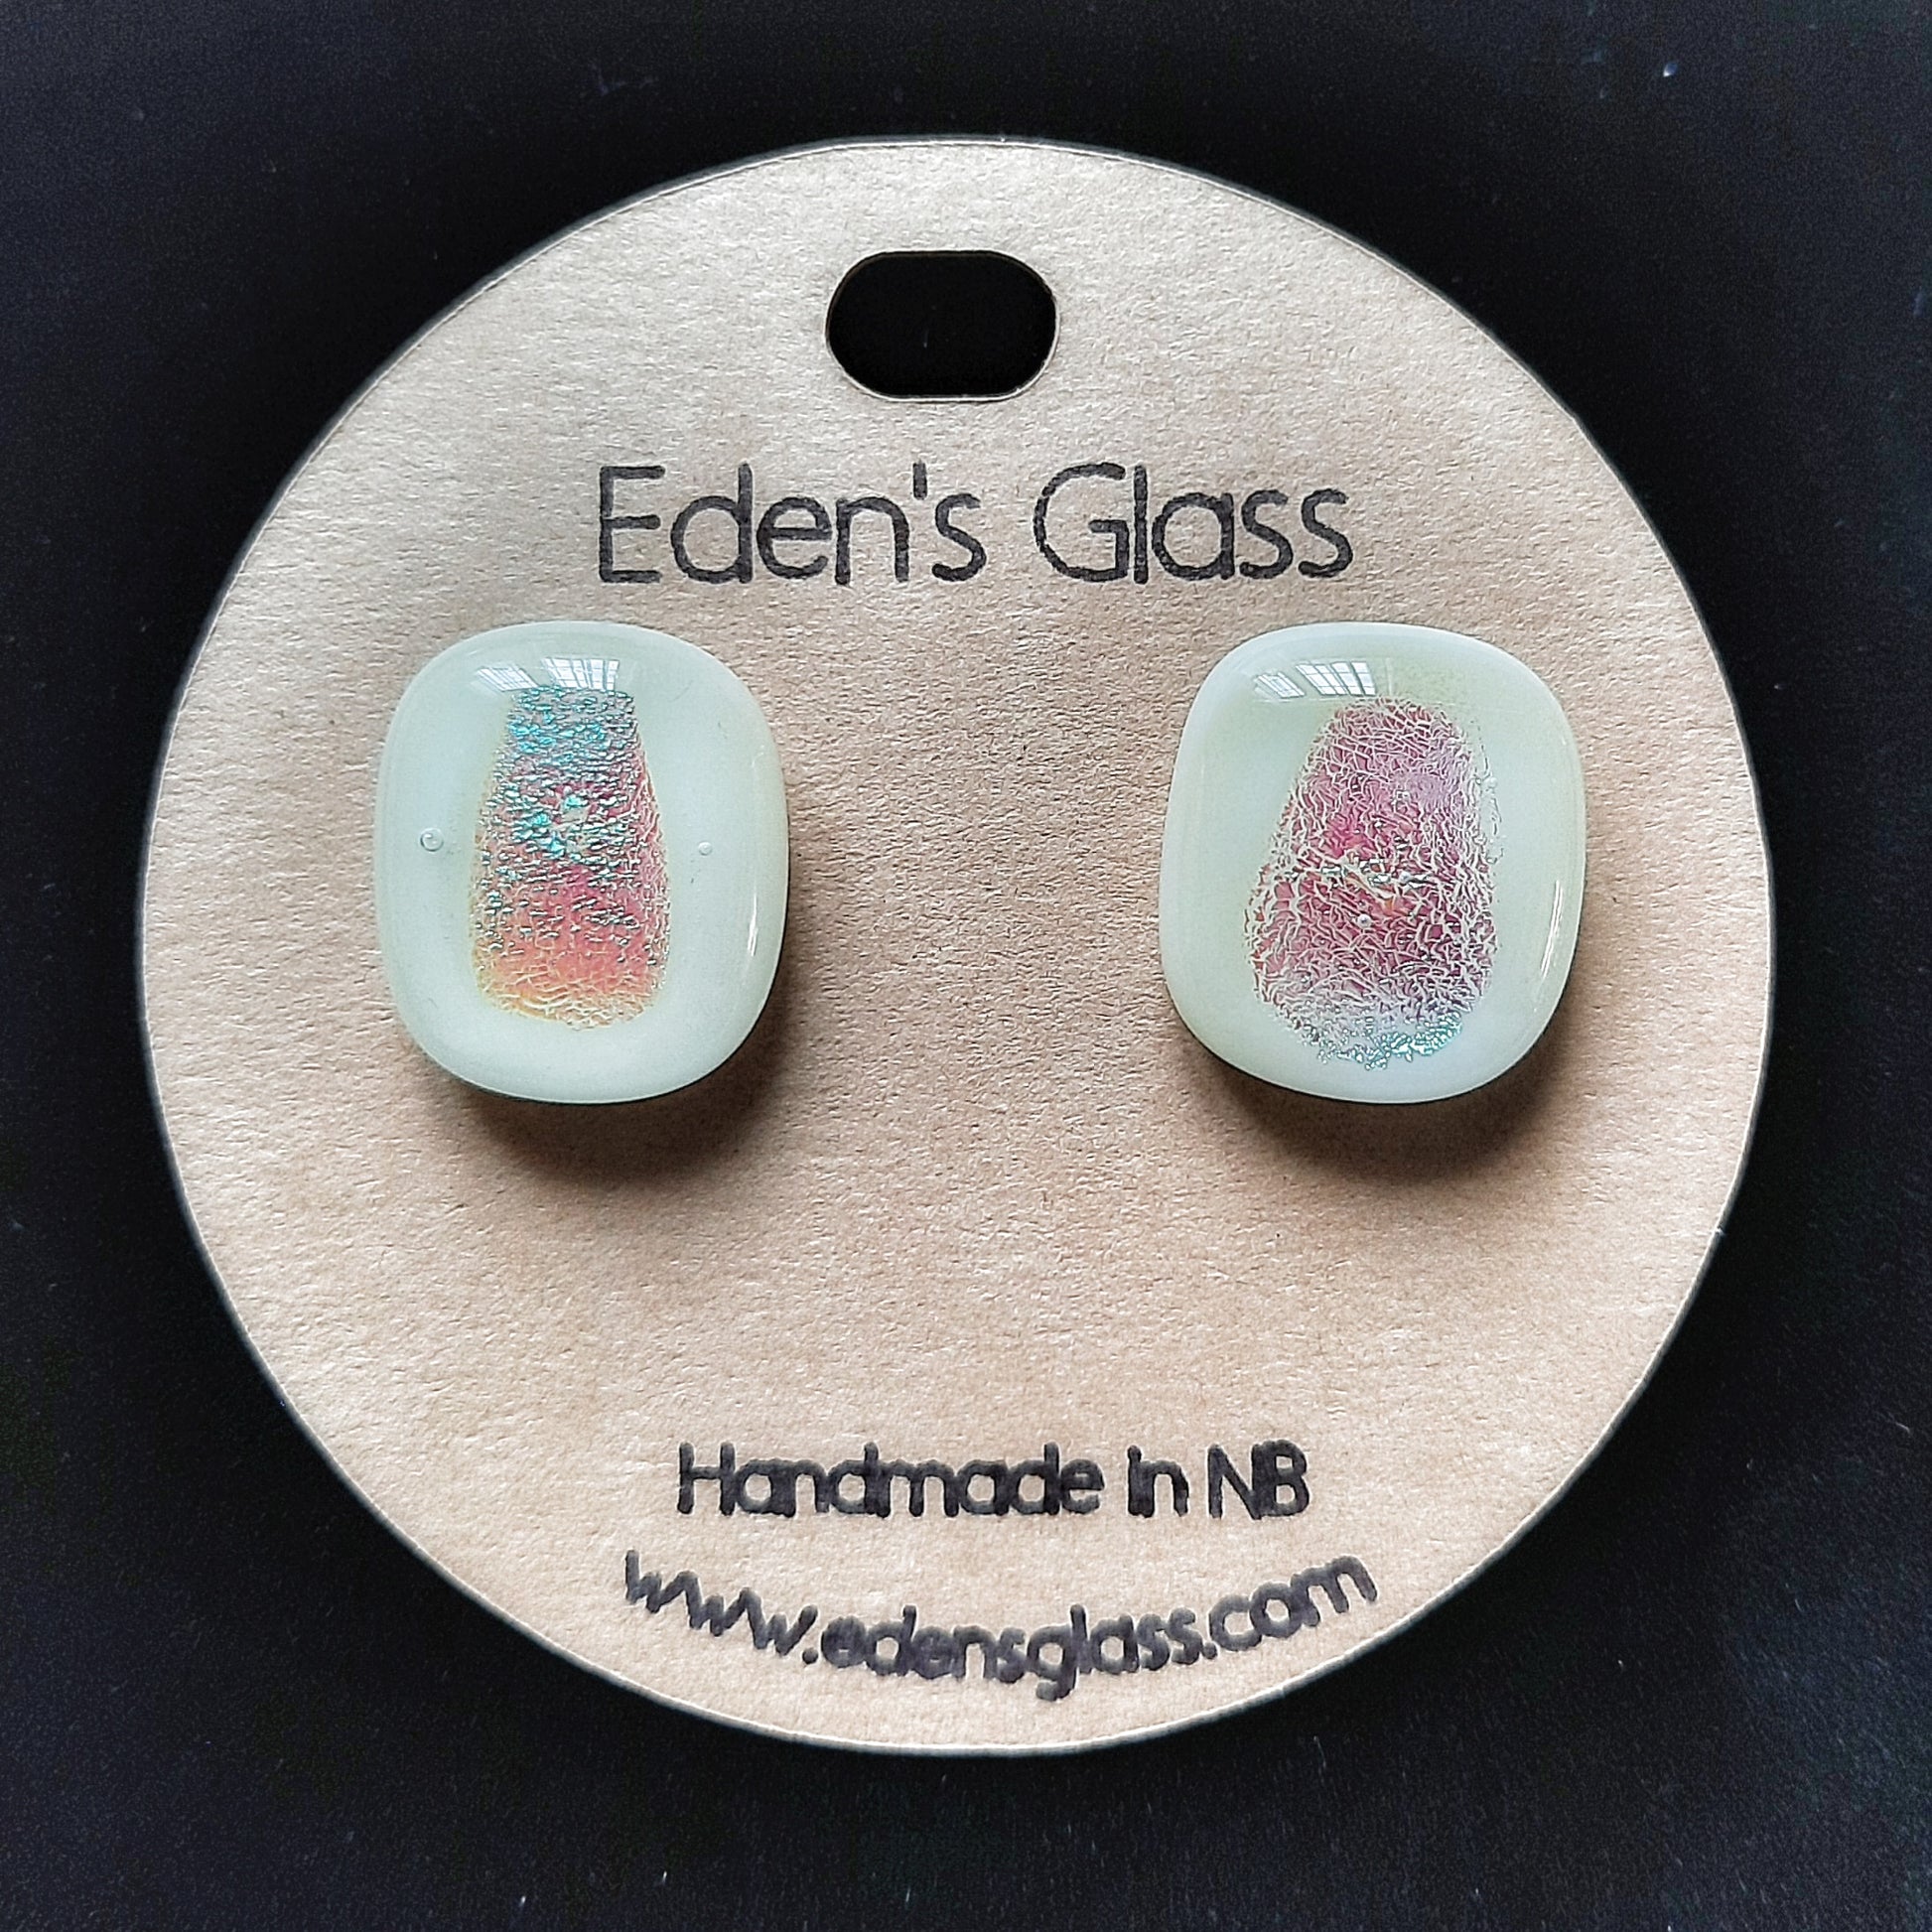 It has a matching fused glass Pendant with same hues